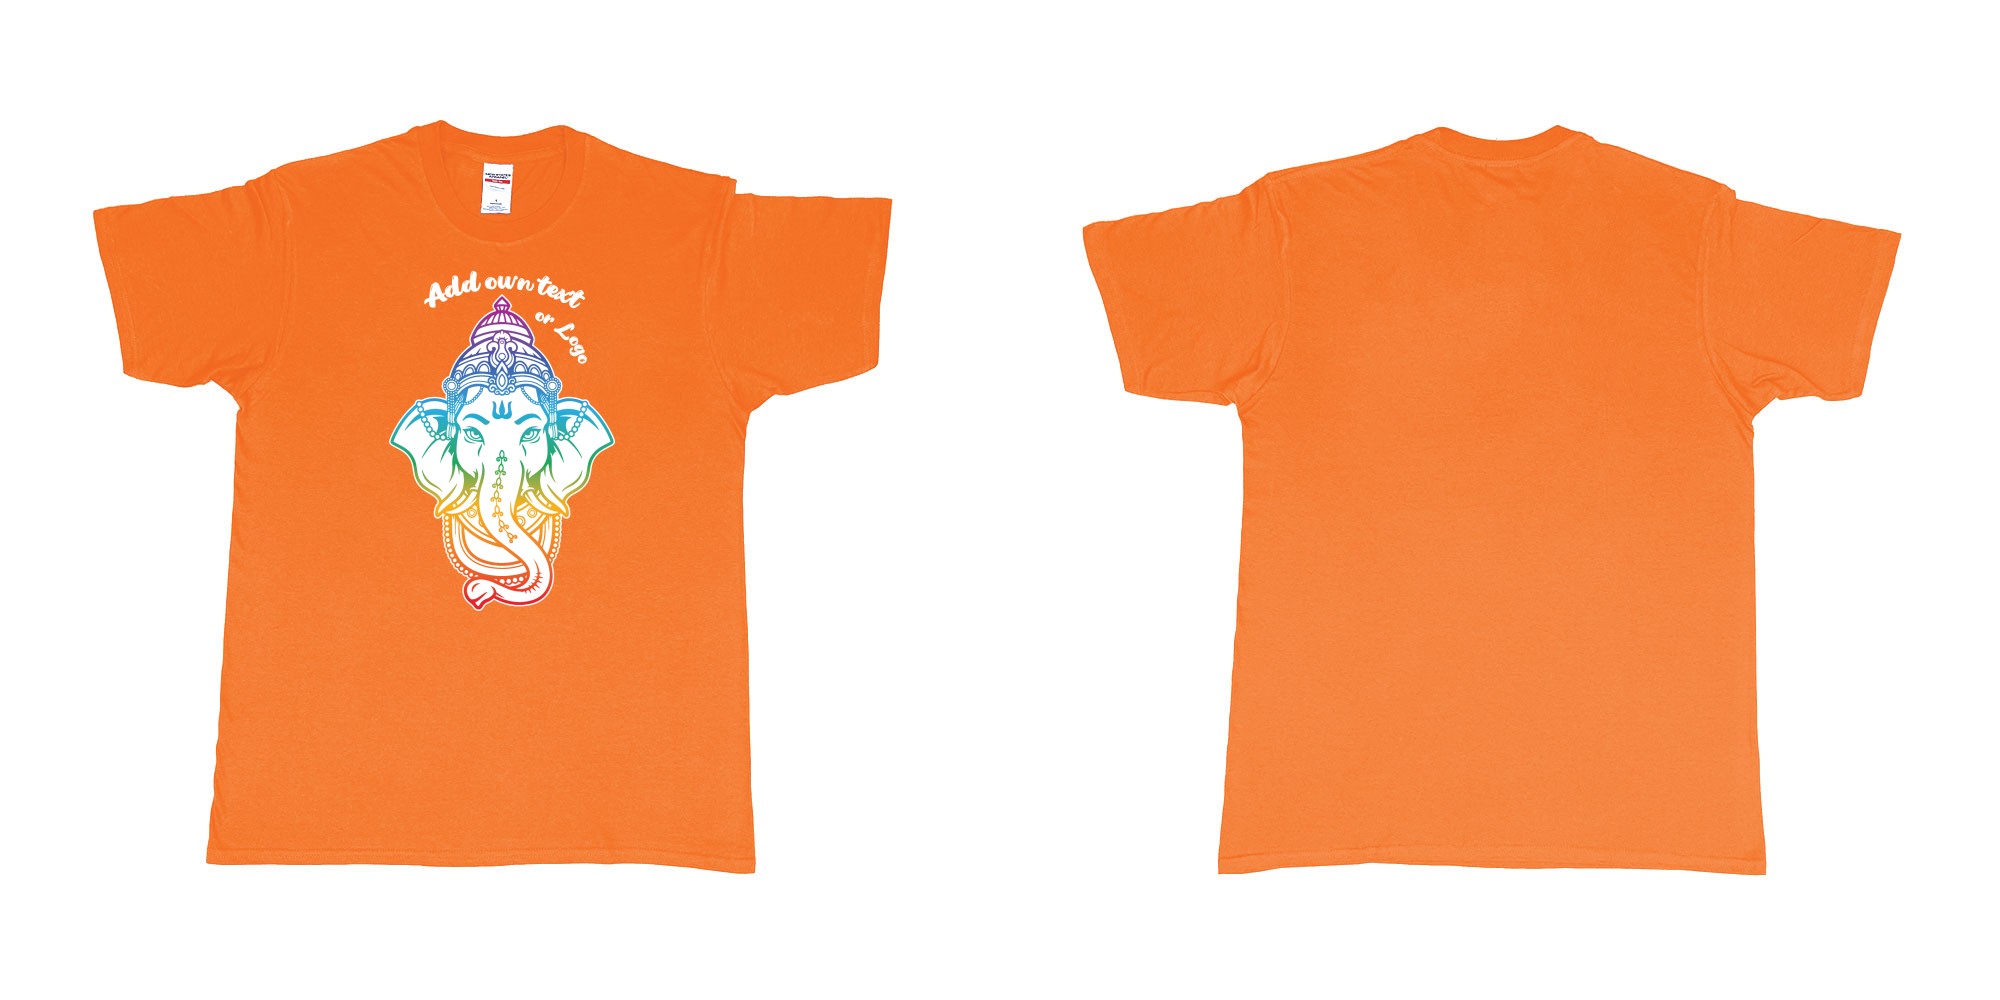 Custom tshirt design ganesha rainbow custom printing in fabric color orange choice your own text made in Bali by The Pirate Way